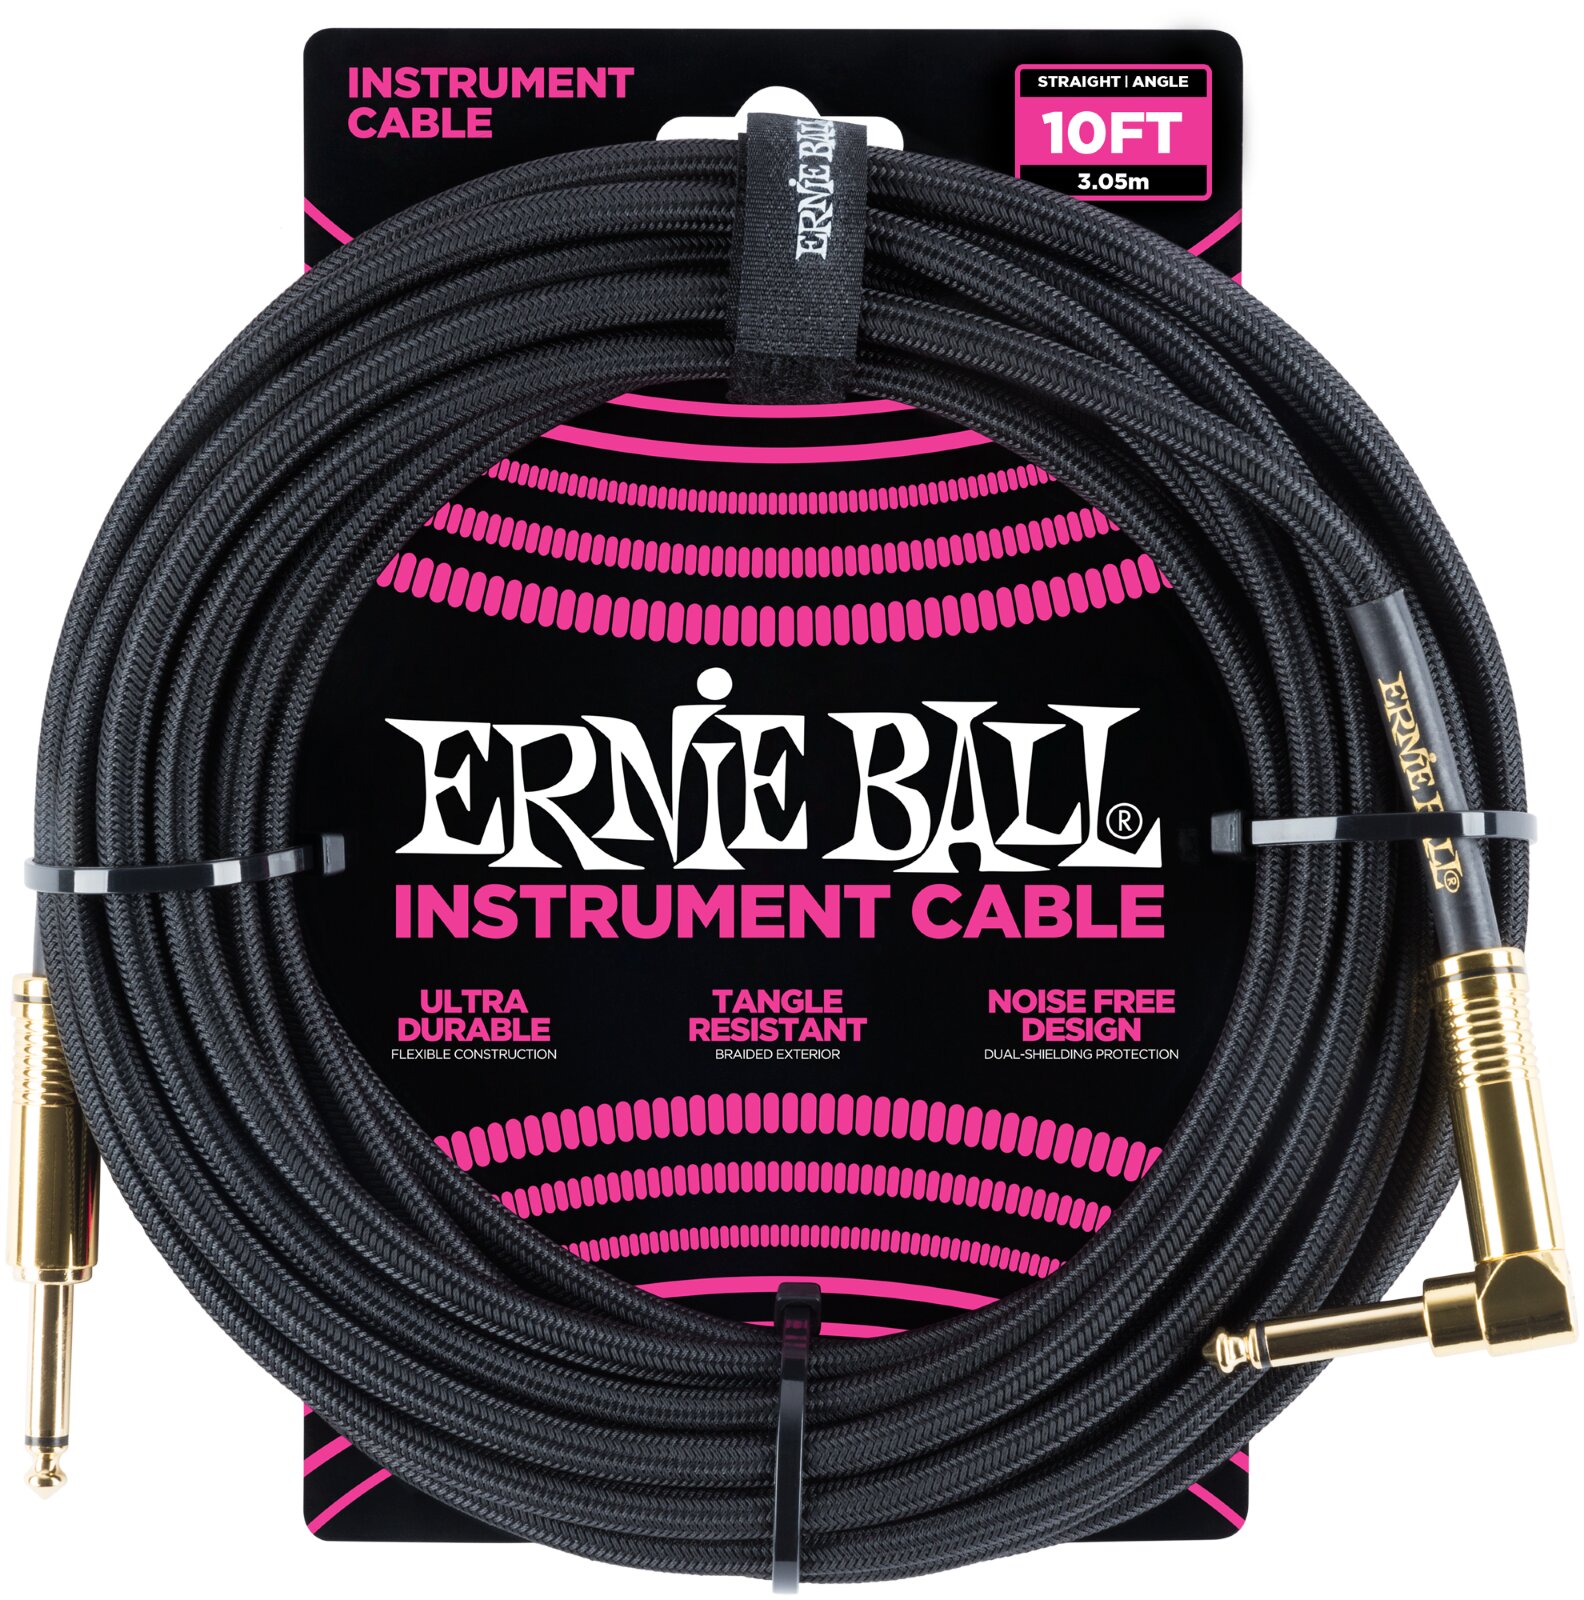 Ernie Ball Instrument Cable, Black Cloth, Straight / Angled, 3m (10ft) : photo 1